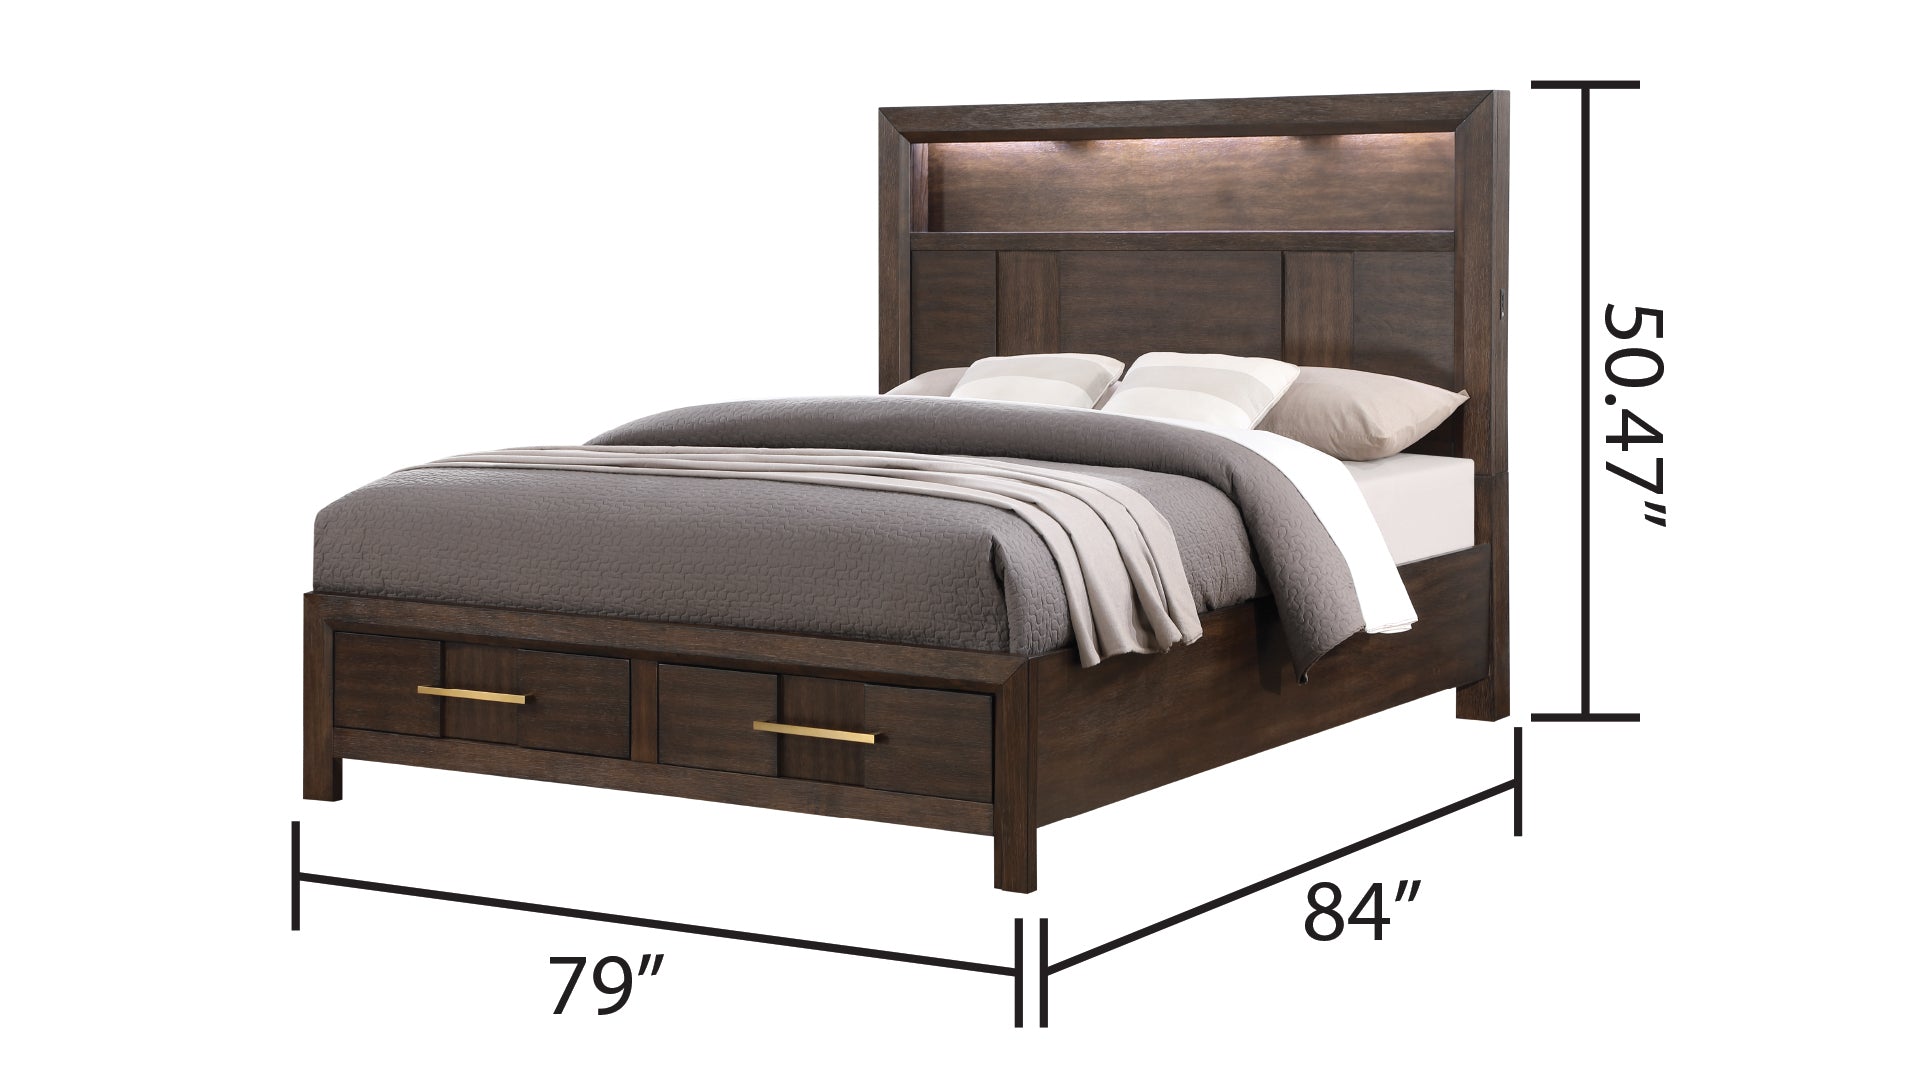 Modern Style King 5PC Storage Bedroom Set Made with Wood, LED Headboard, Bluetooth Speakers & USB Ports